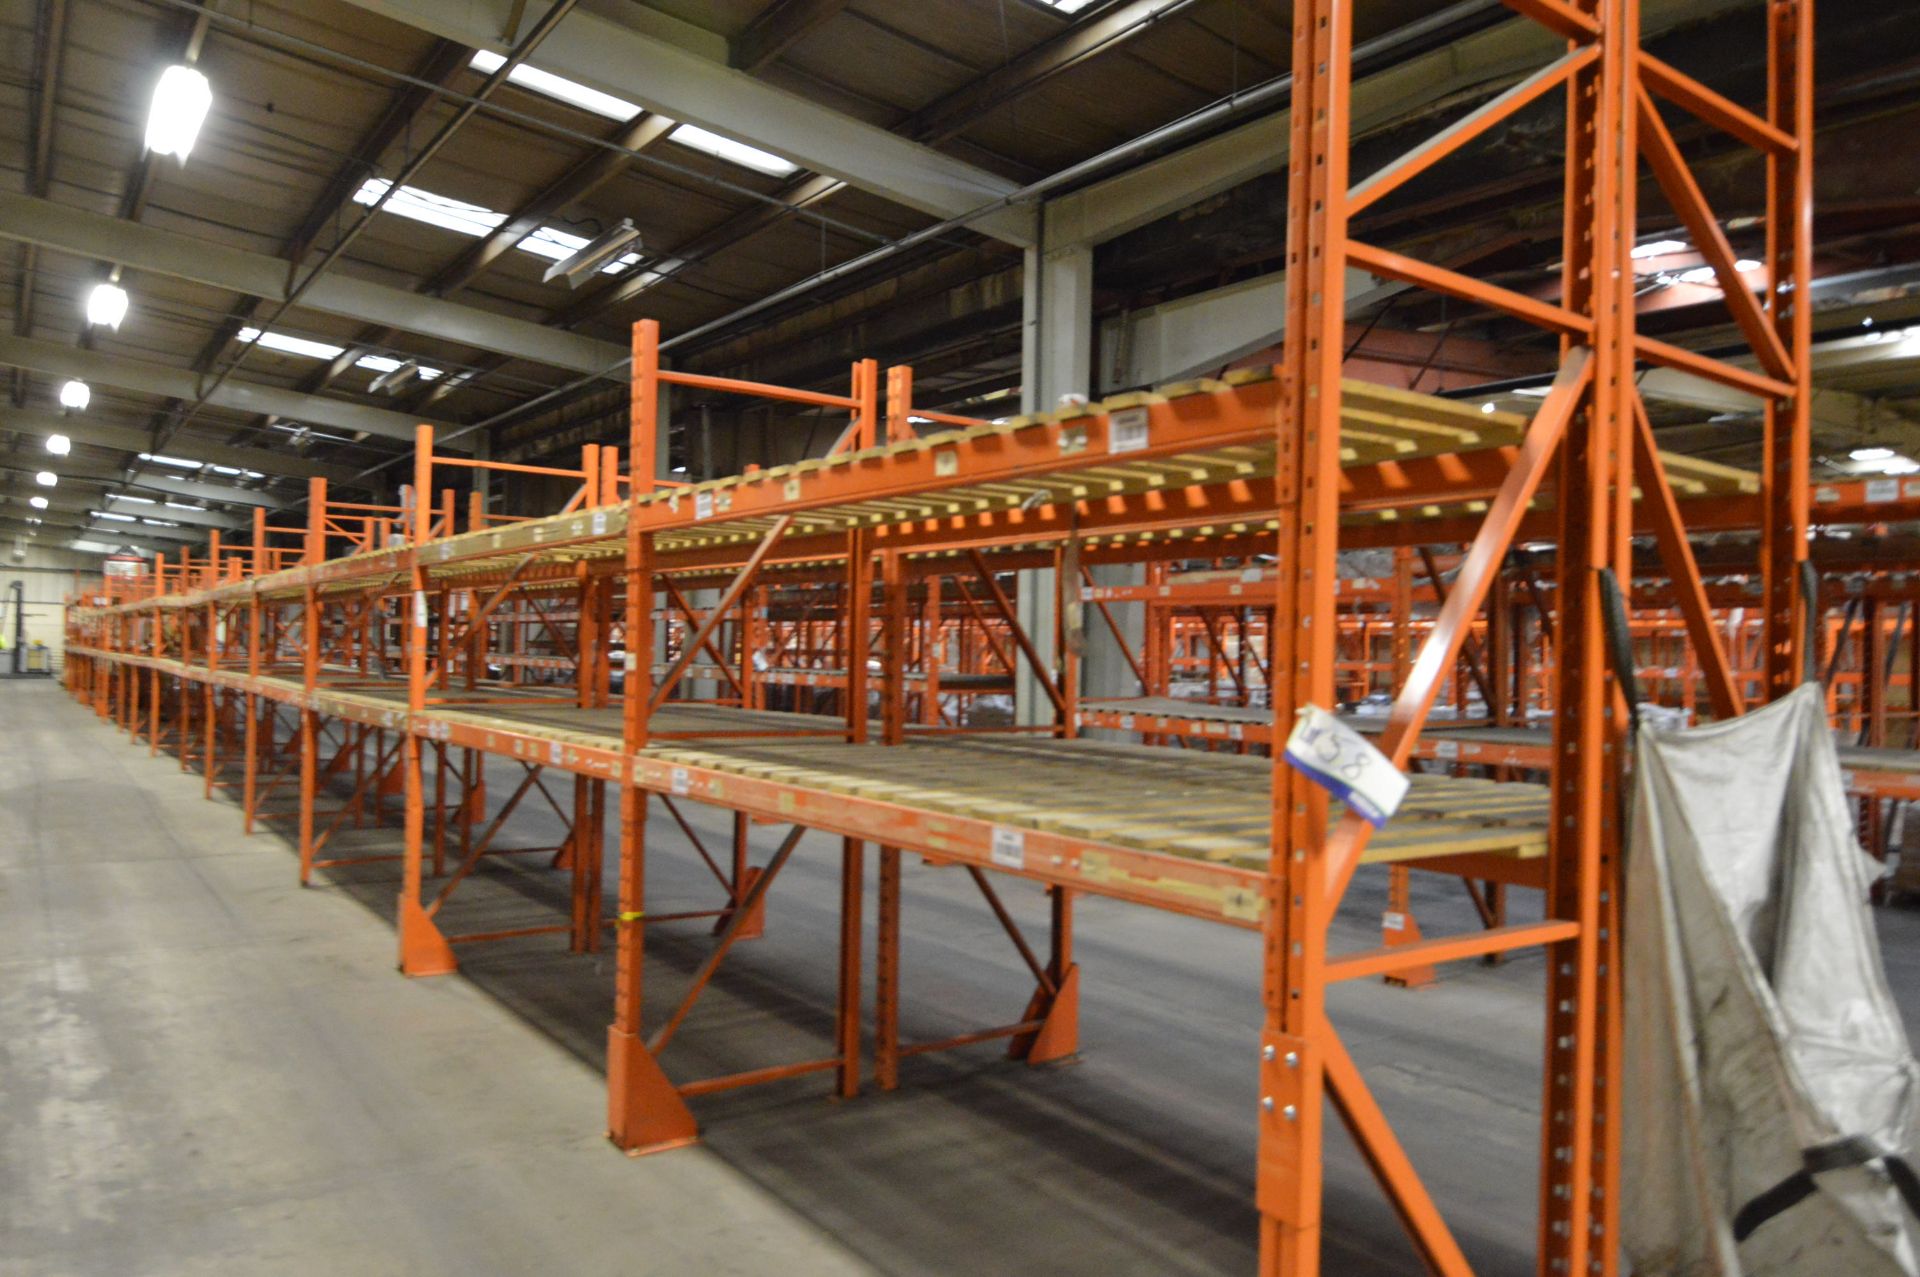 Redirack SD170 SINGLE SIDED 19 BAY TWO TIER PALLET RACK, approx. 50m long x 900mm x mainly 2.7m